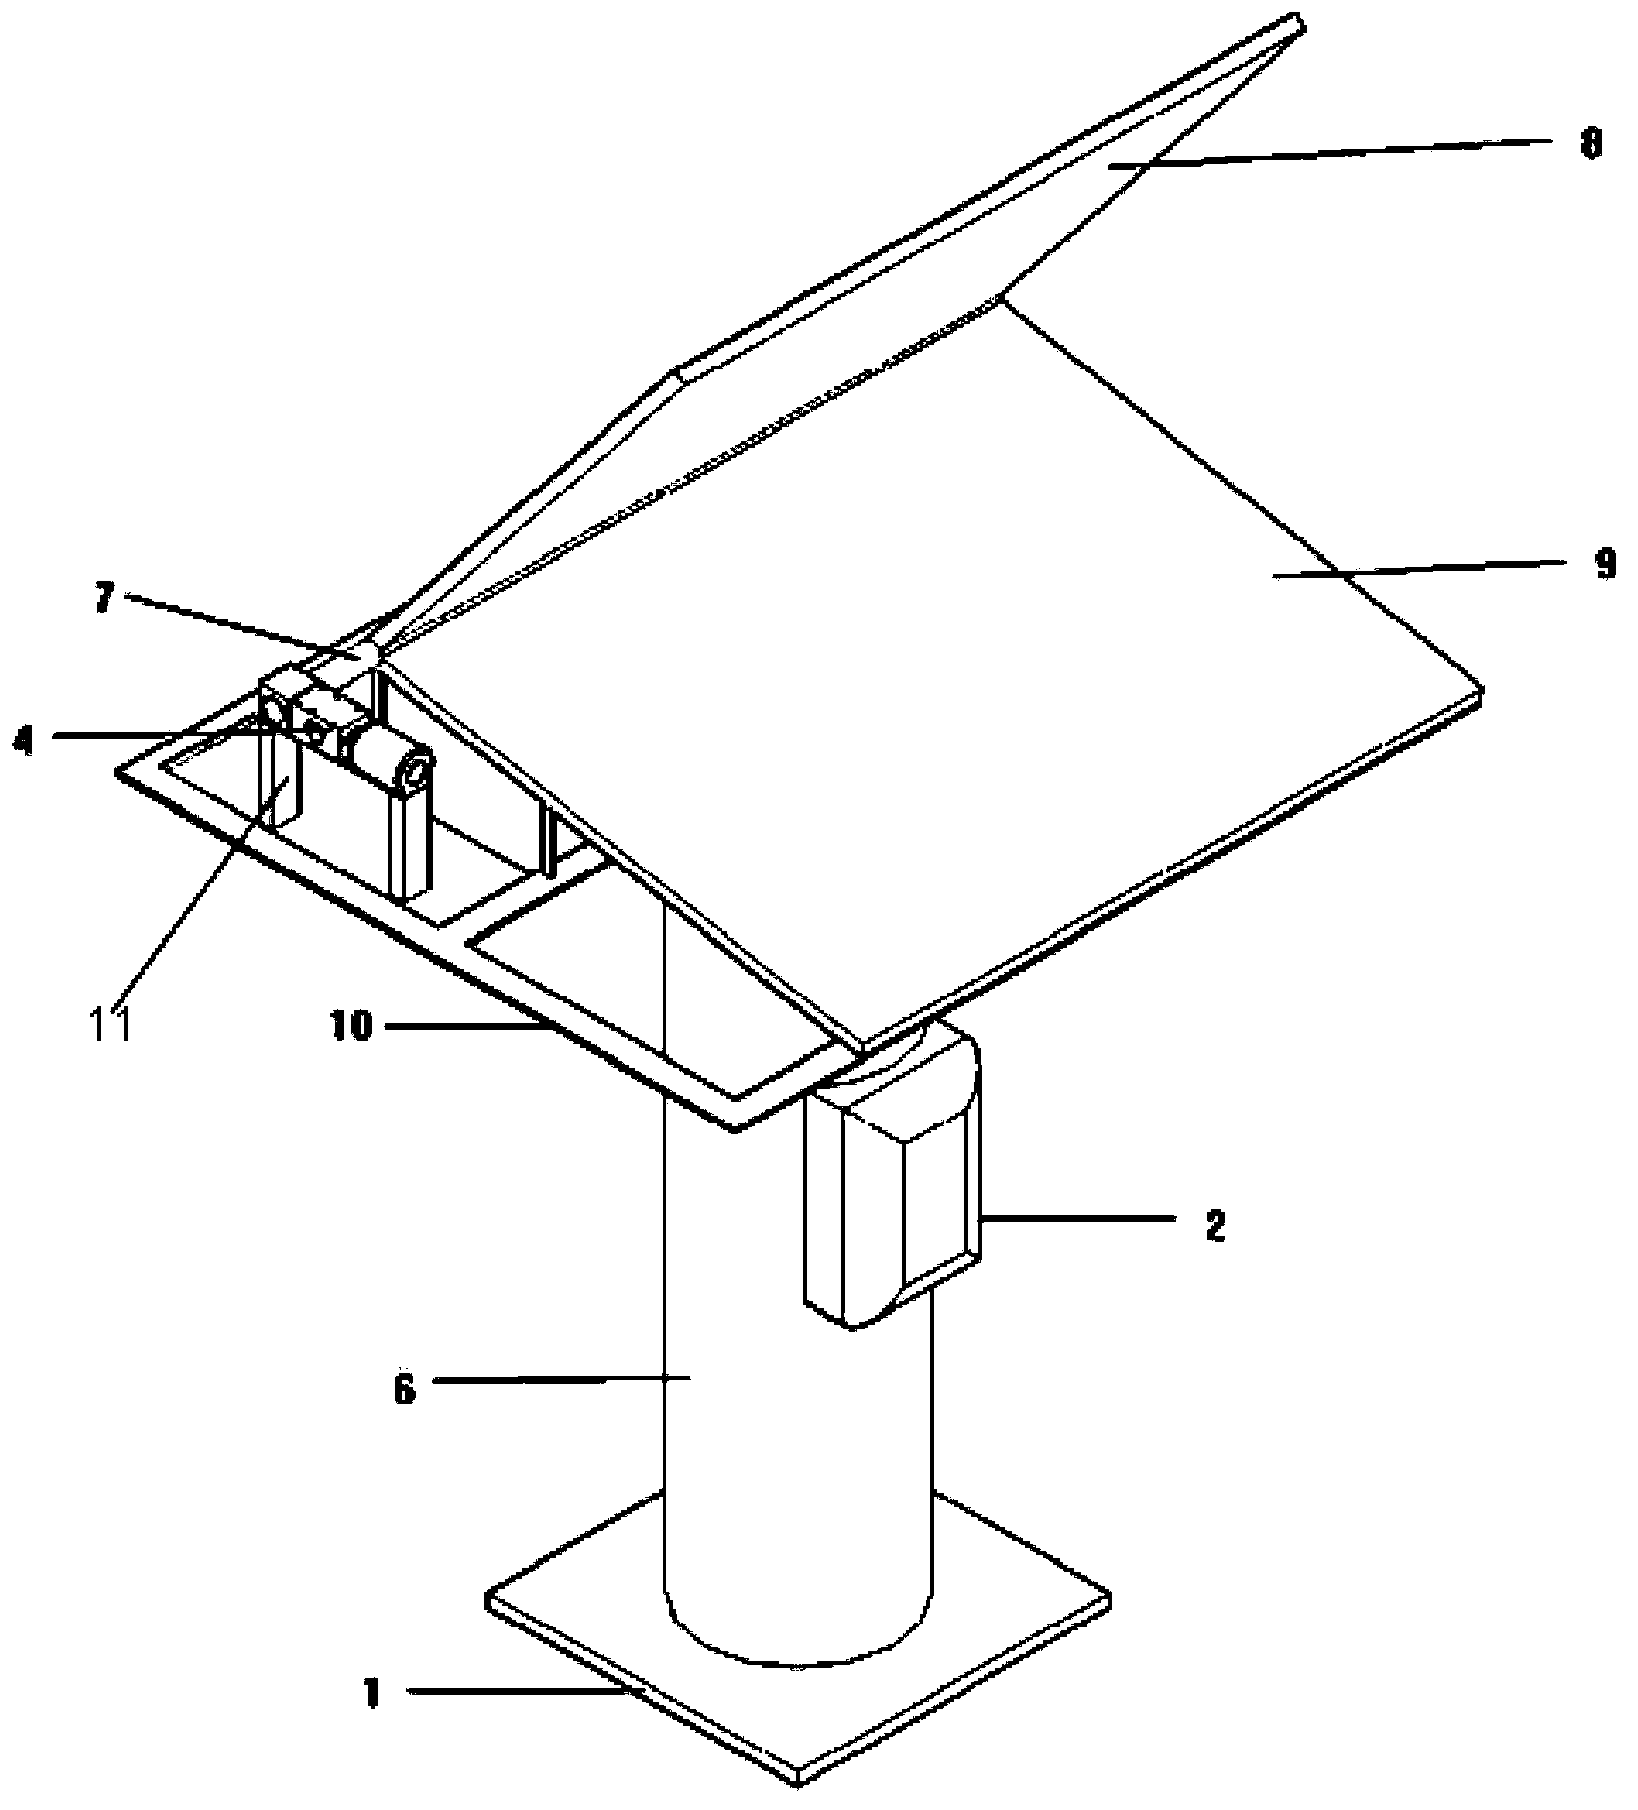 Sunlight directional reflection device with double-sided mirror structure